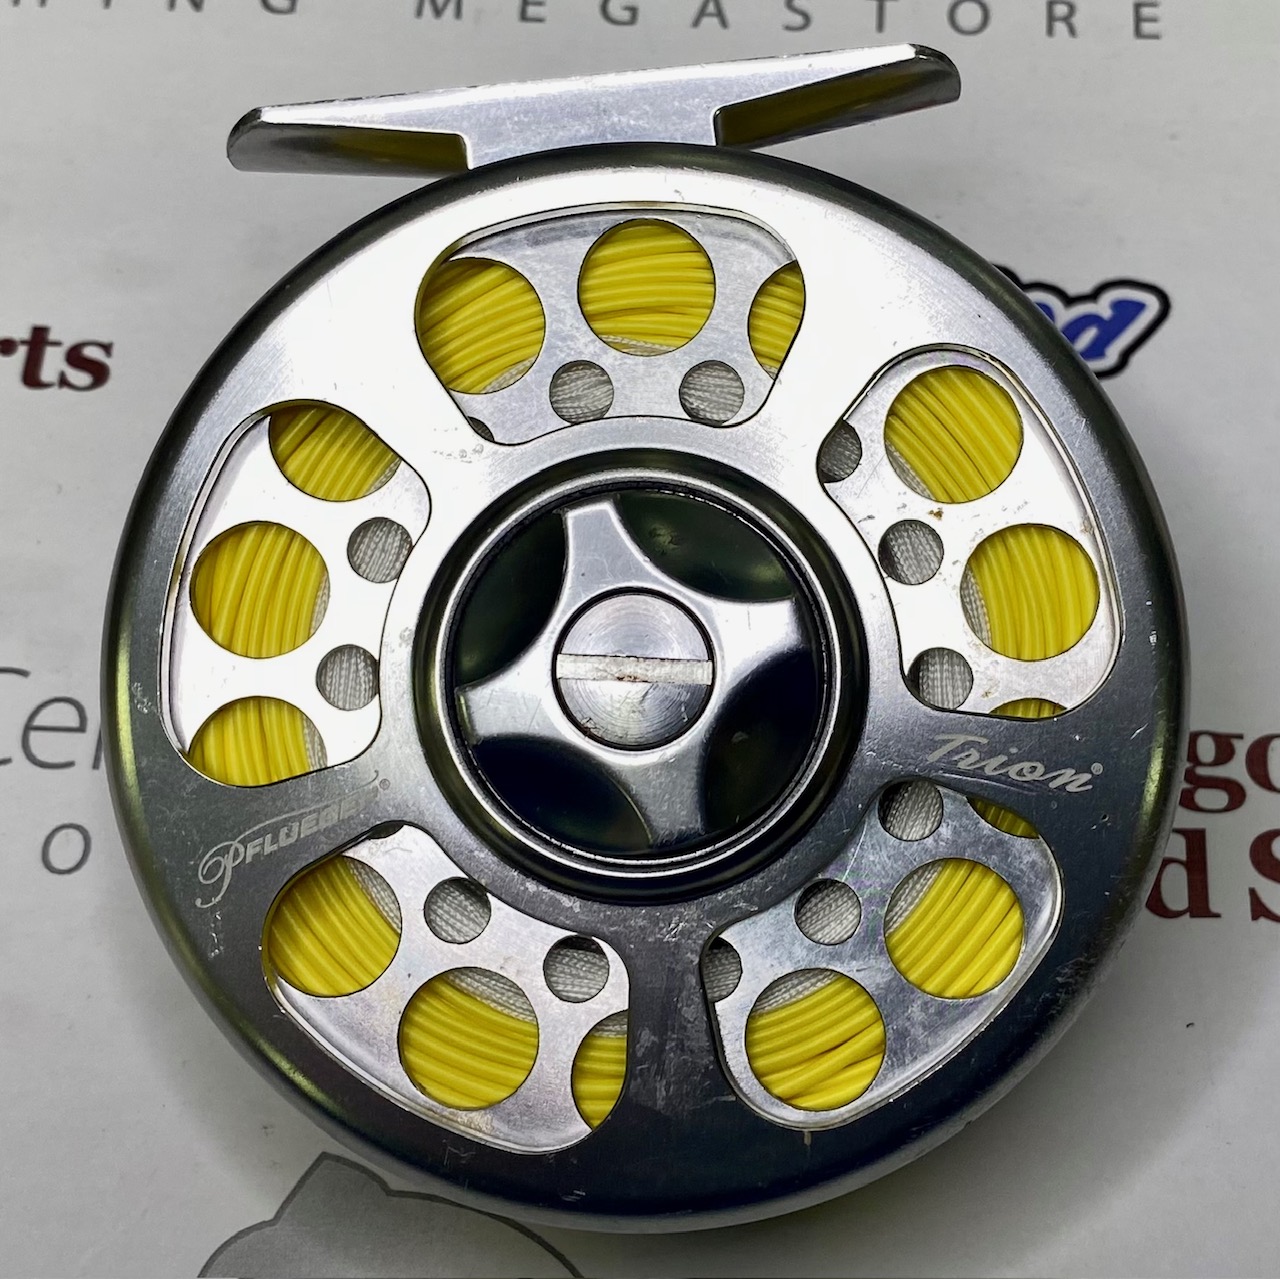 Pflueger Trion 3.25 trout fly fishing reel in case